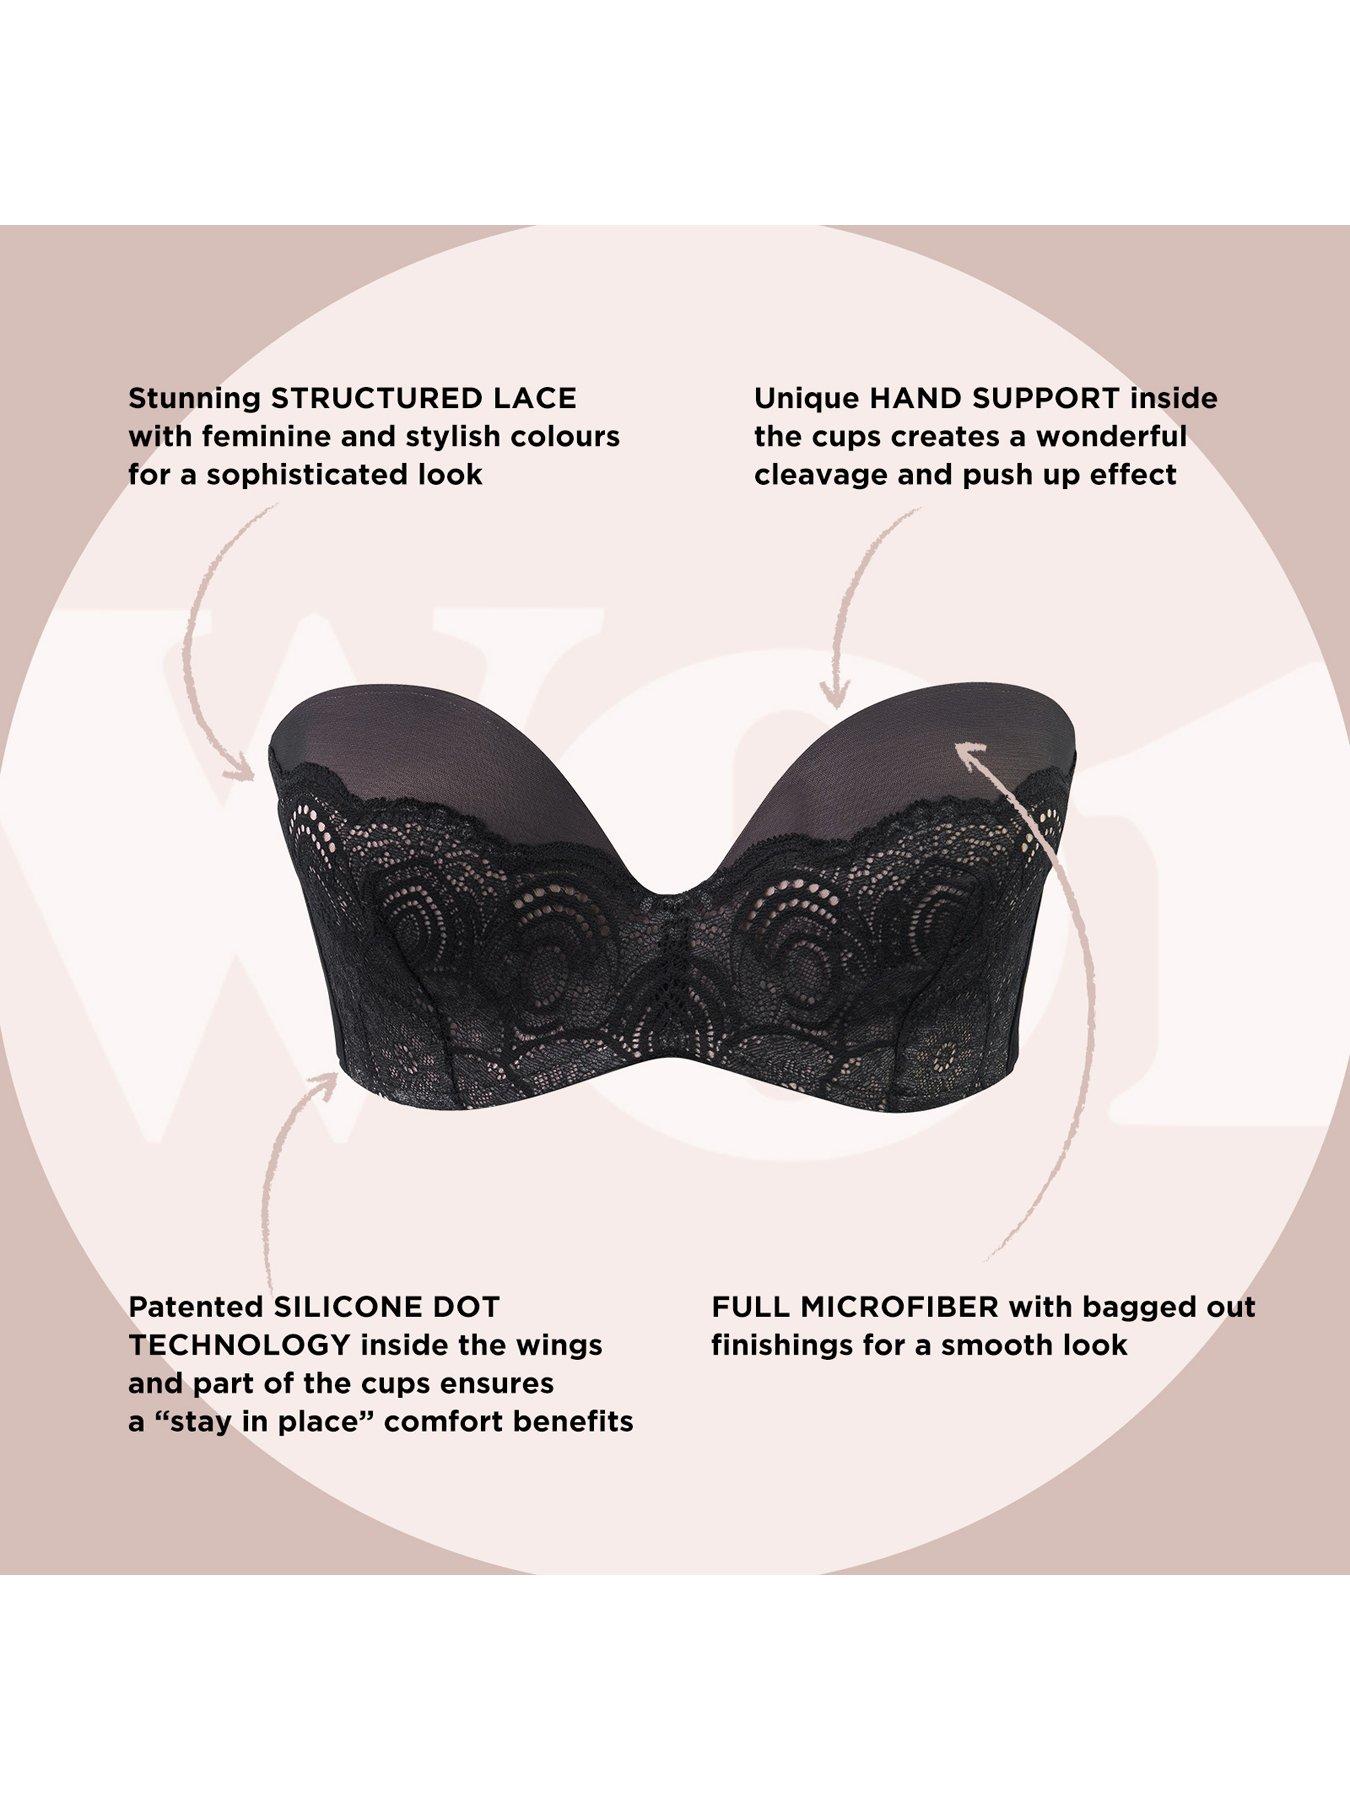 Women's Smooth Padded Convertible Strapless Half Cup Underwire Silicone  Band Multiway Bra H916